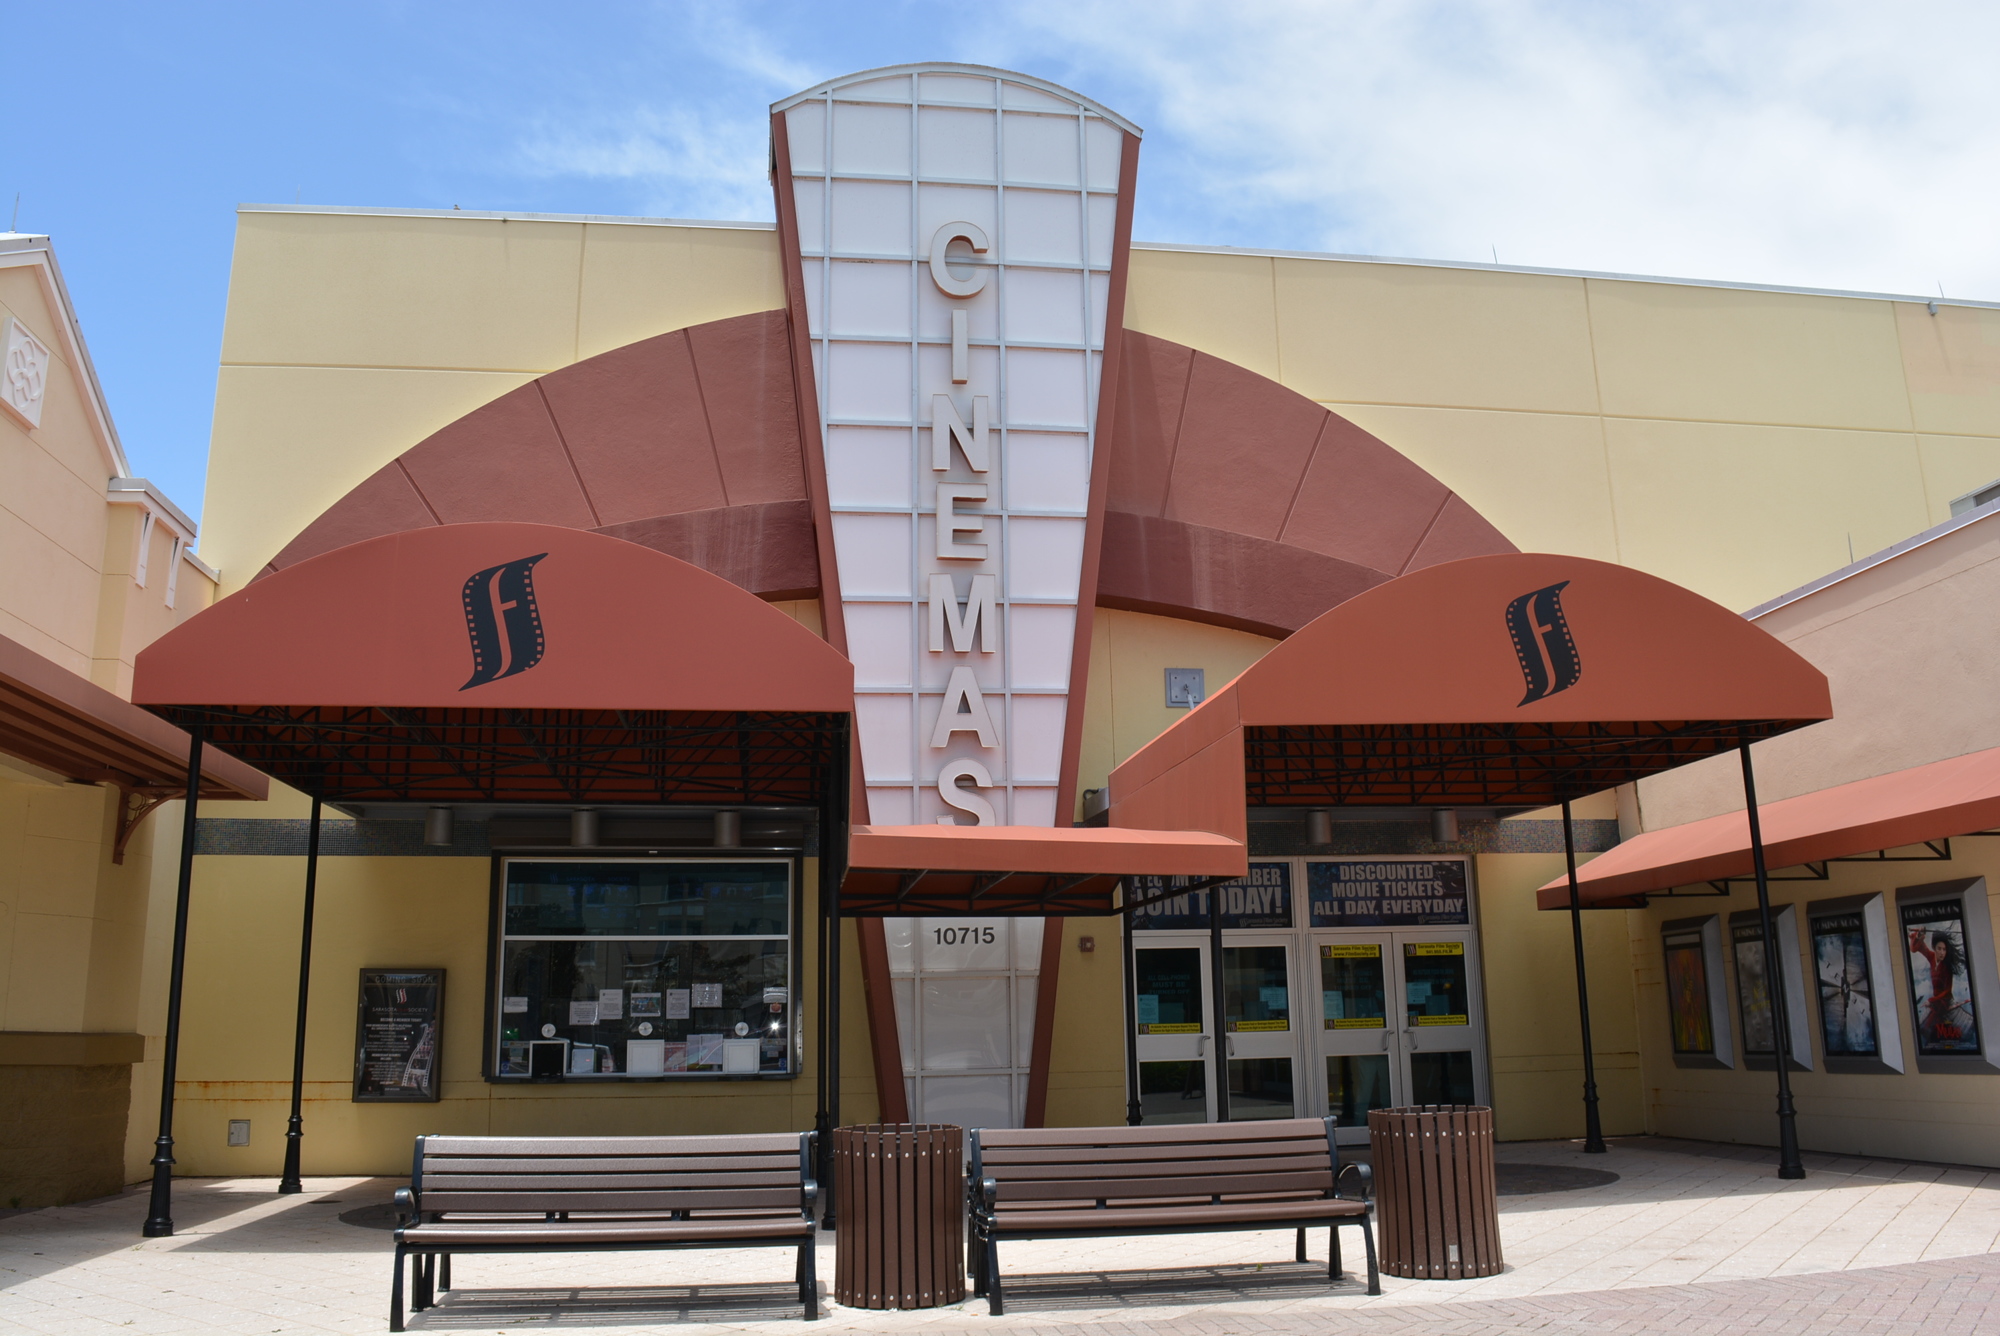 The Sarasota Film Society's Save Our Cinemas fundraiser will be at Lakewood Ranch Cinema. Only 150 tickets will be sold to the fundraiser. File photo.